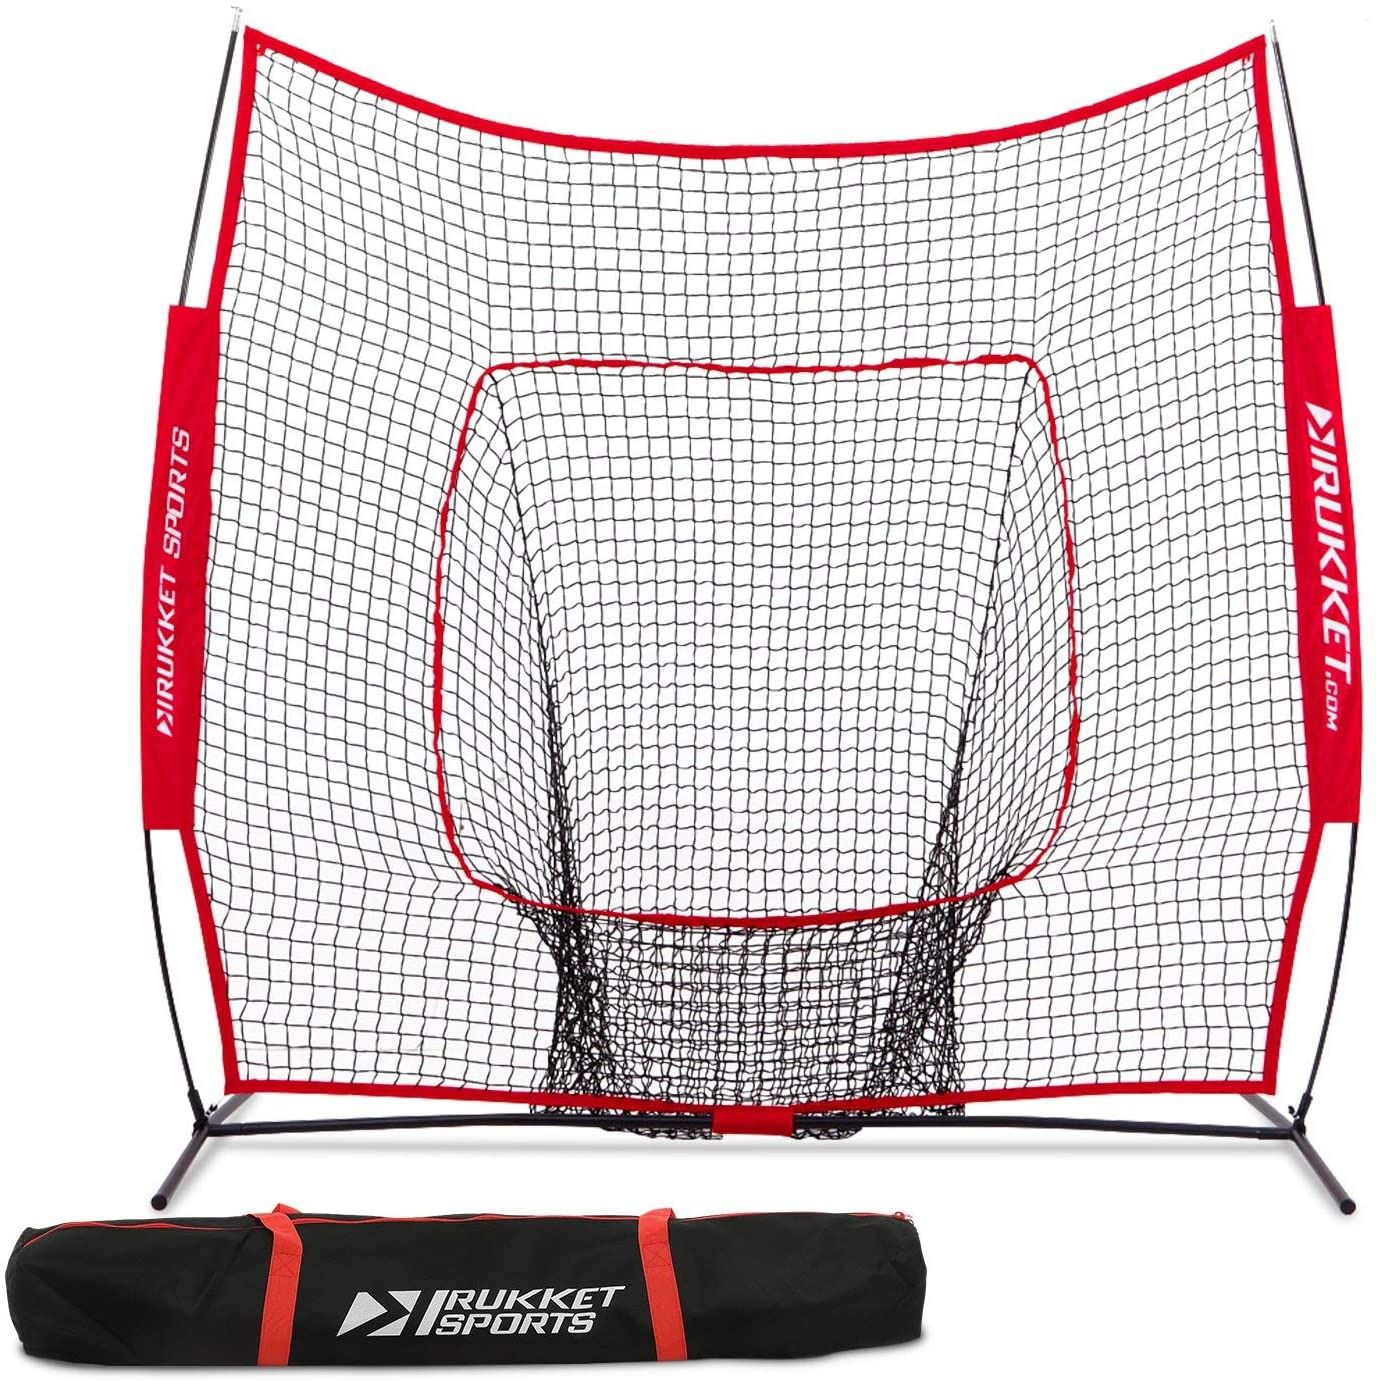 Rukket 7x7 Baseball & Softball Net, Practice Hitting, Pitching, Batting and Catching, Backstop Screen Equipment Training Aids, Includes Carry Bag (7x7